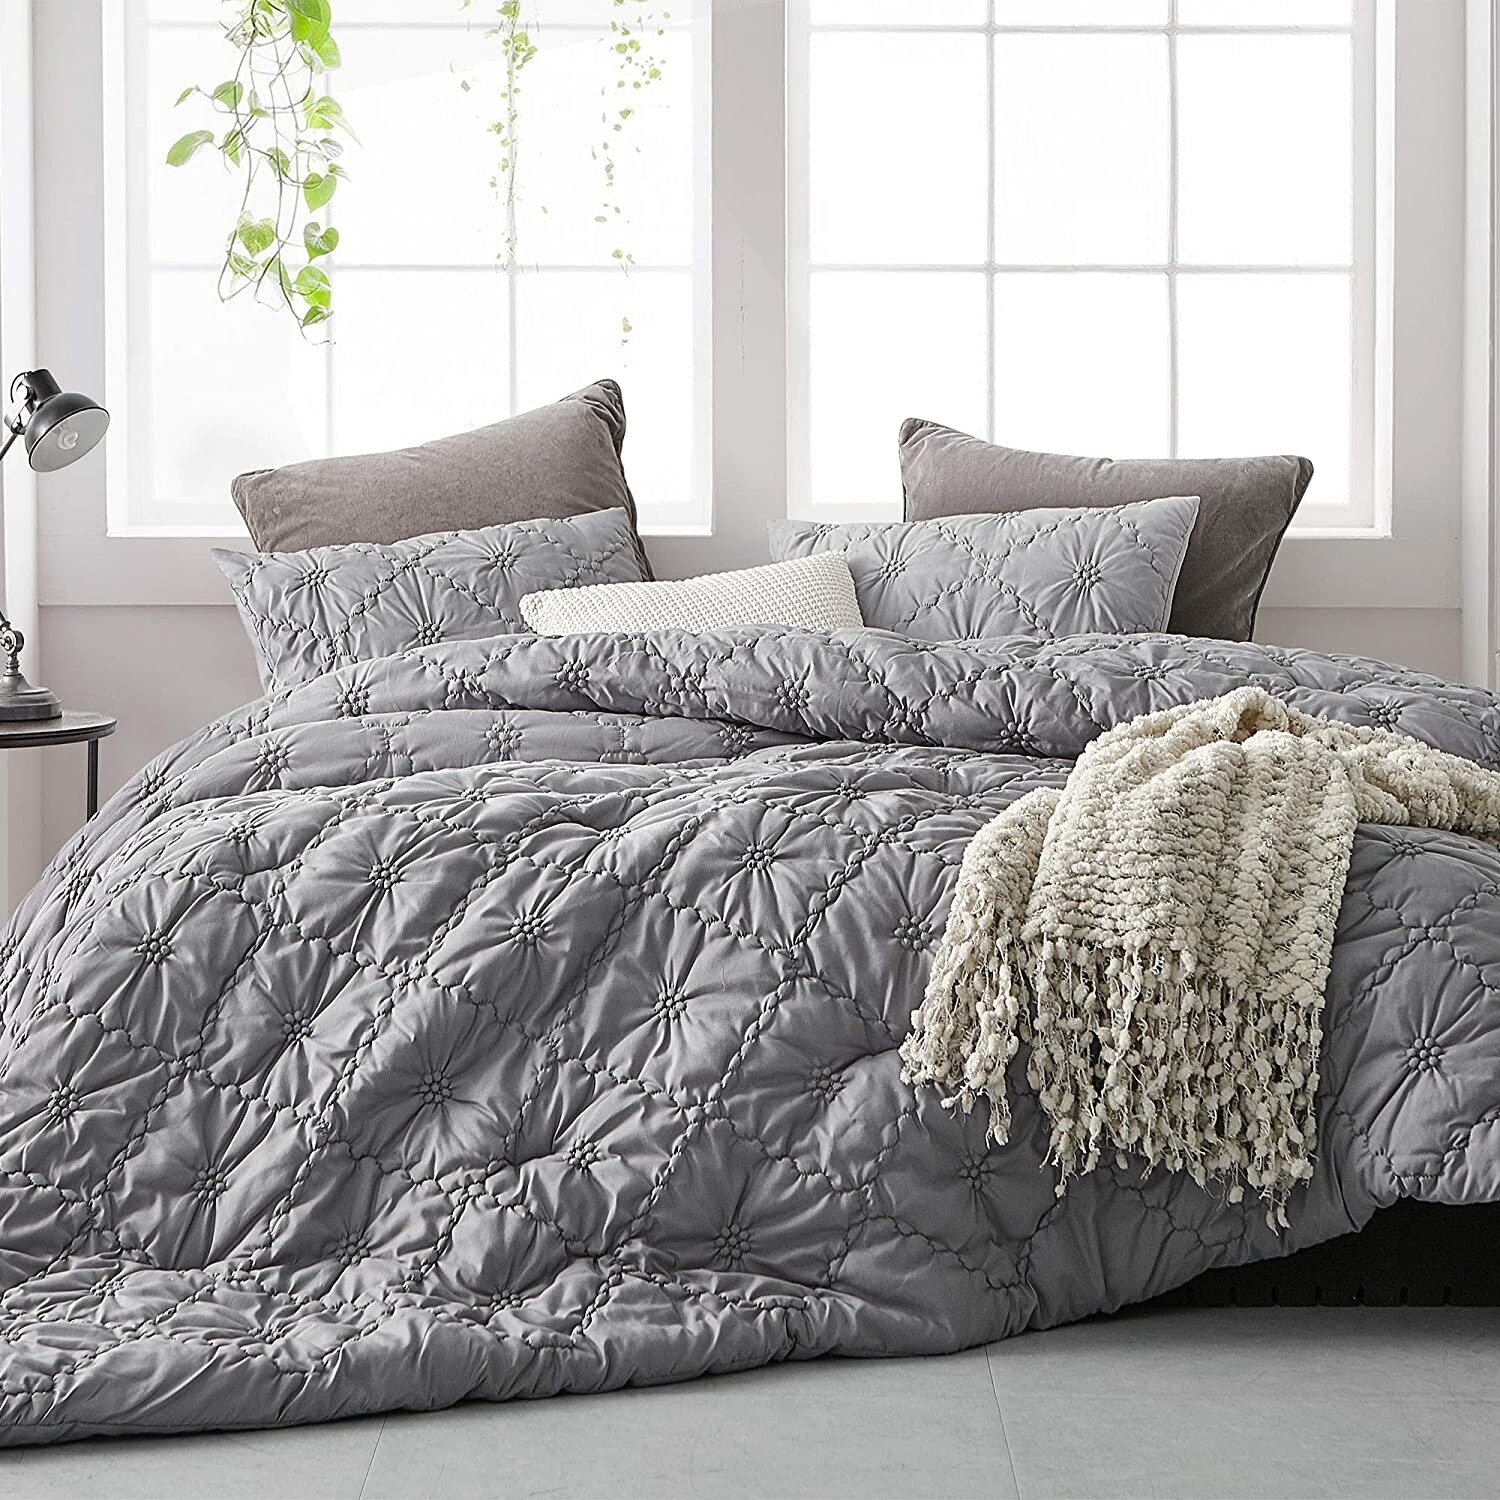 https://ak1.ostkcdn.com/images/products/is/images/direct/19561ab92a123a8620aa897fc58879b1aafe70da/Farmhouse-Morning-Textured-Bedding---Oversized-Comforter---Alloy.jpg